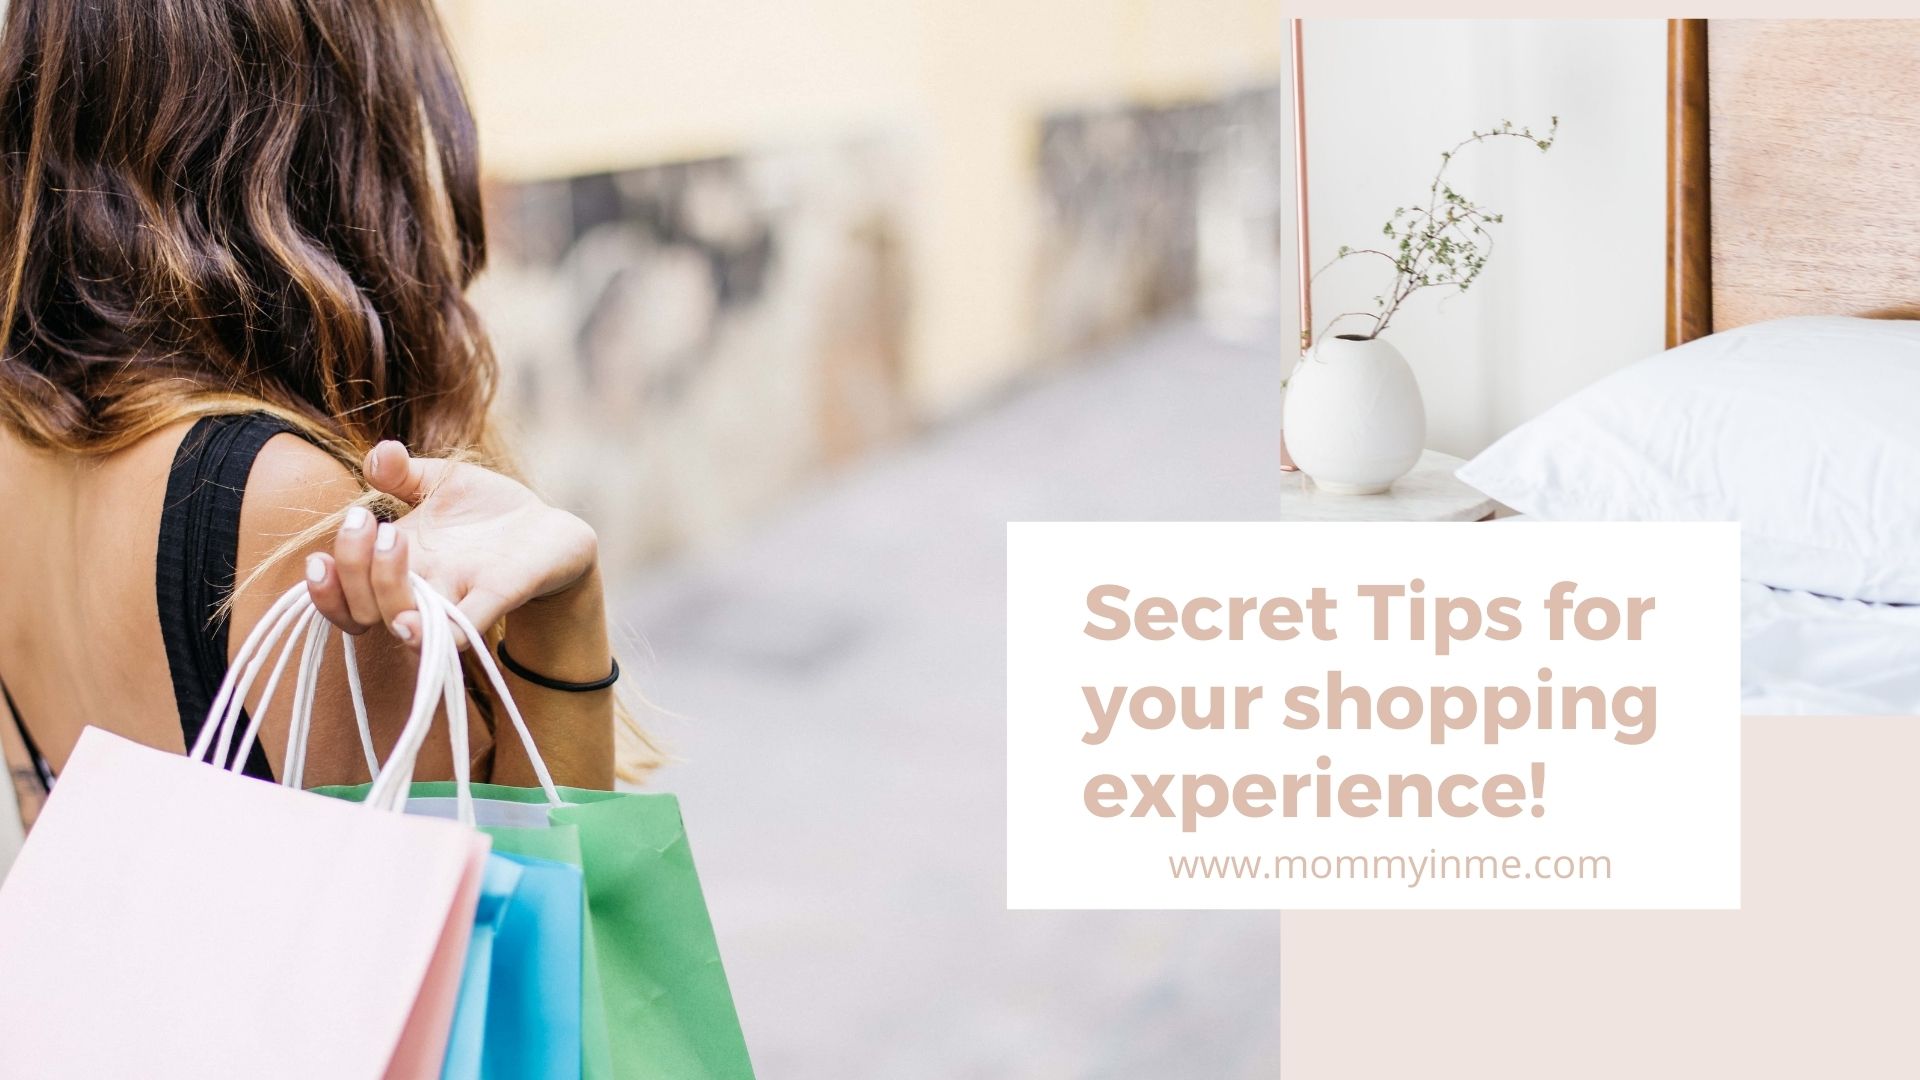 7 Secrets Tricks to Enjoy Your Shopping Mall Experience